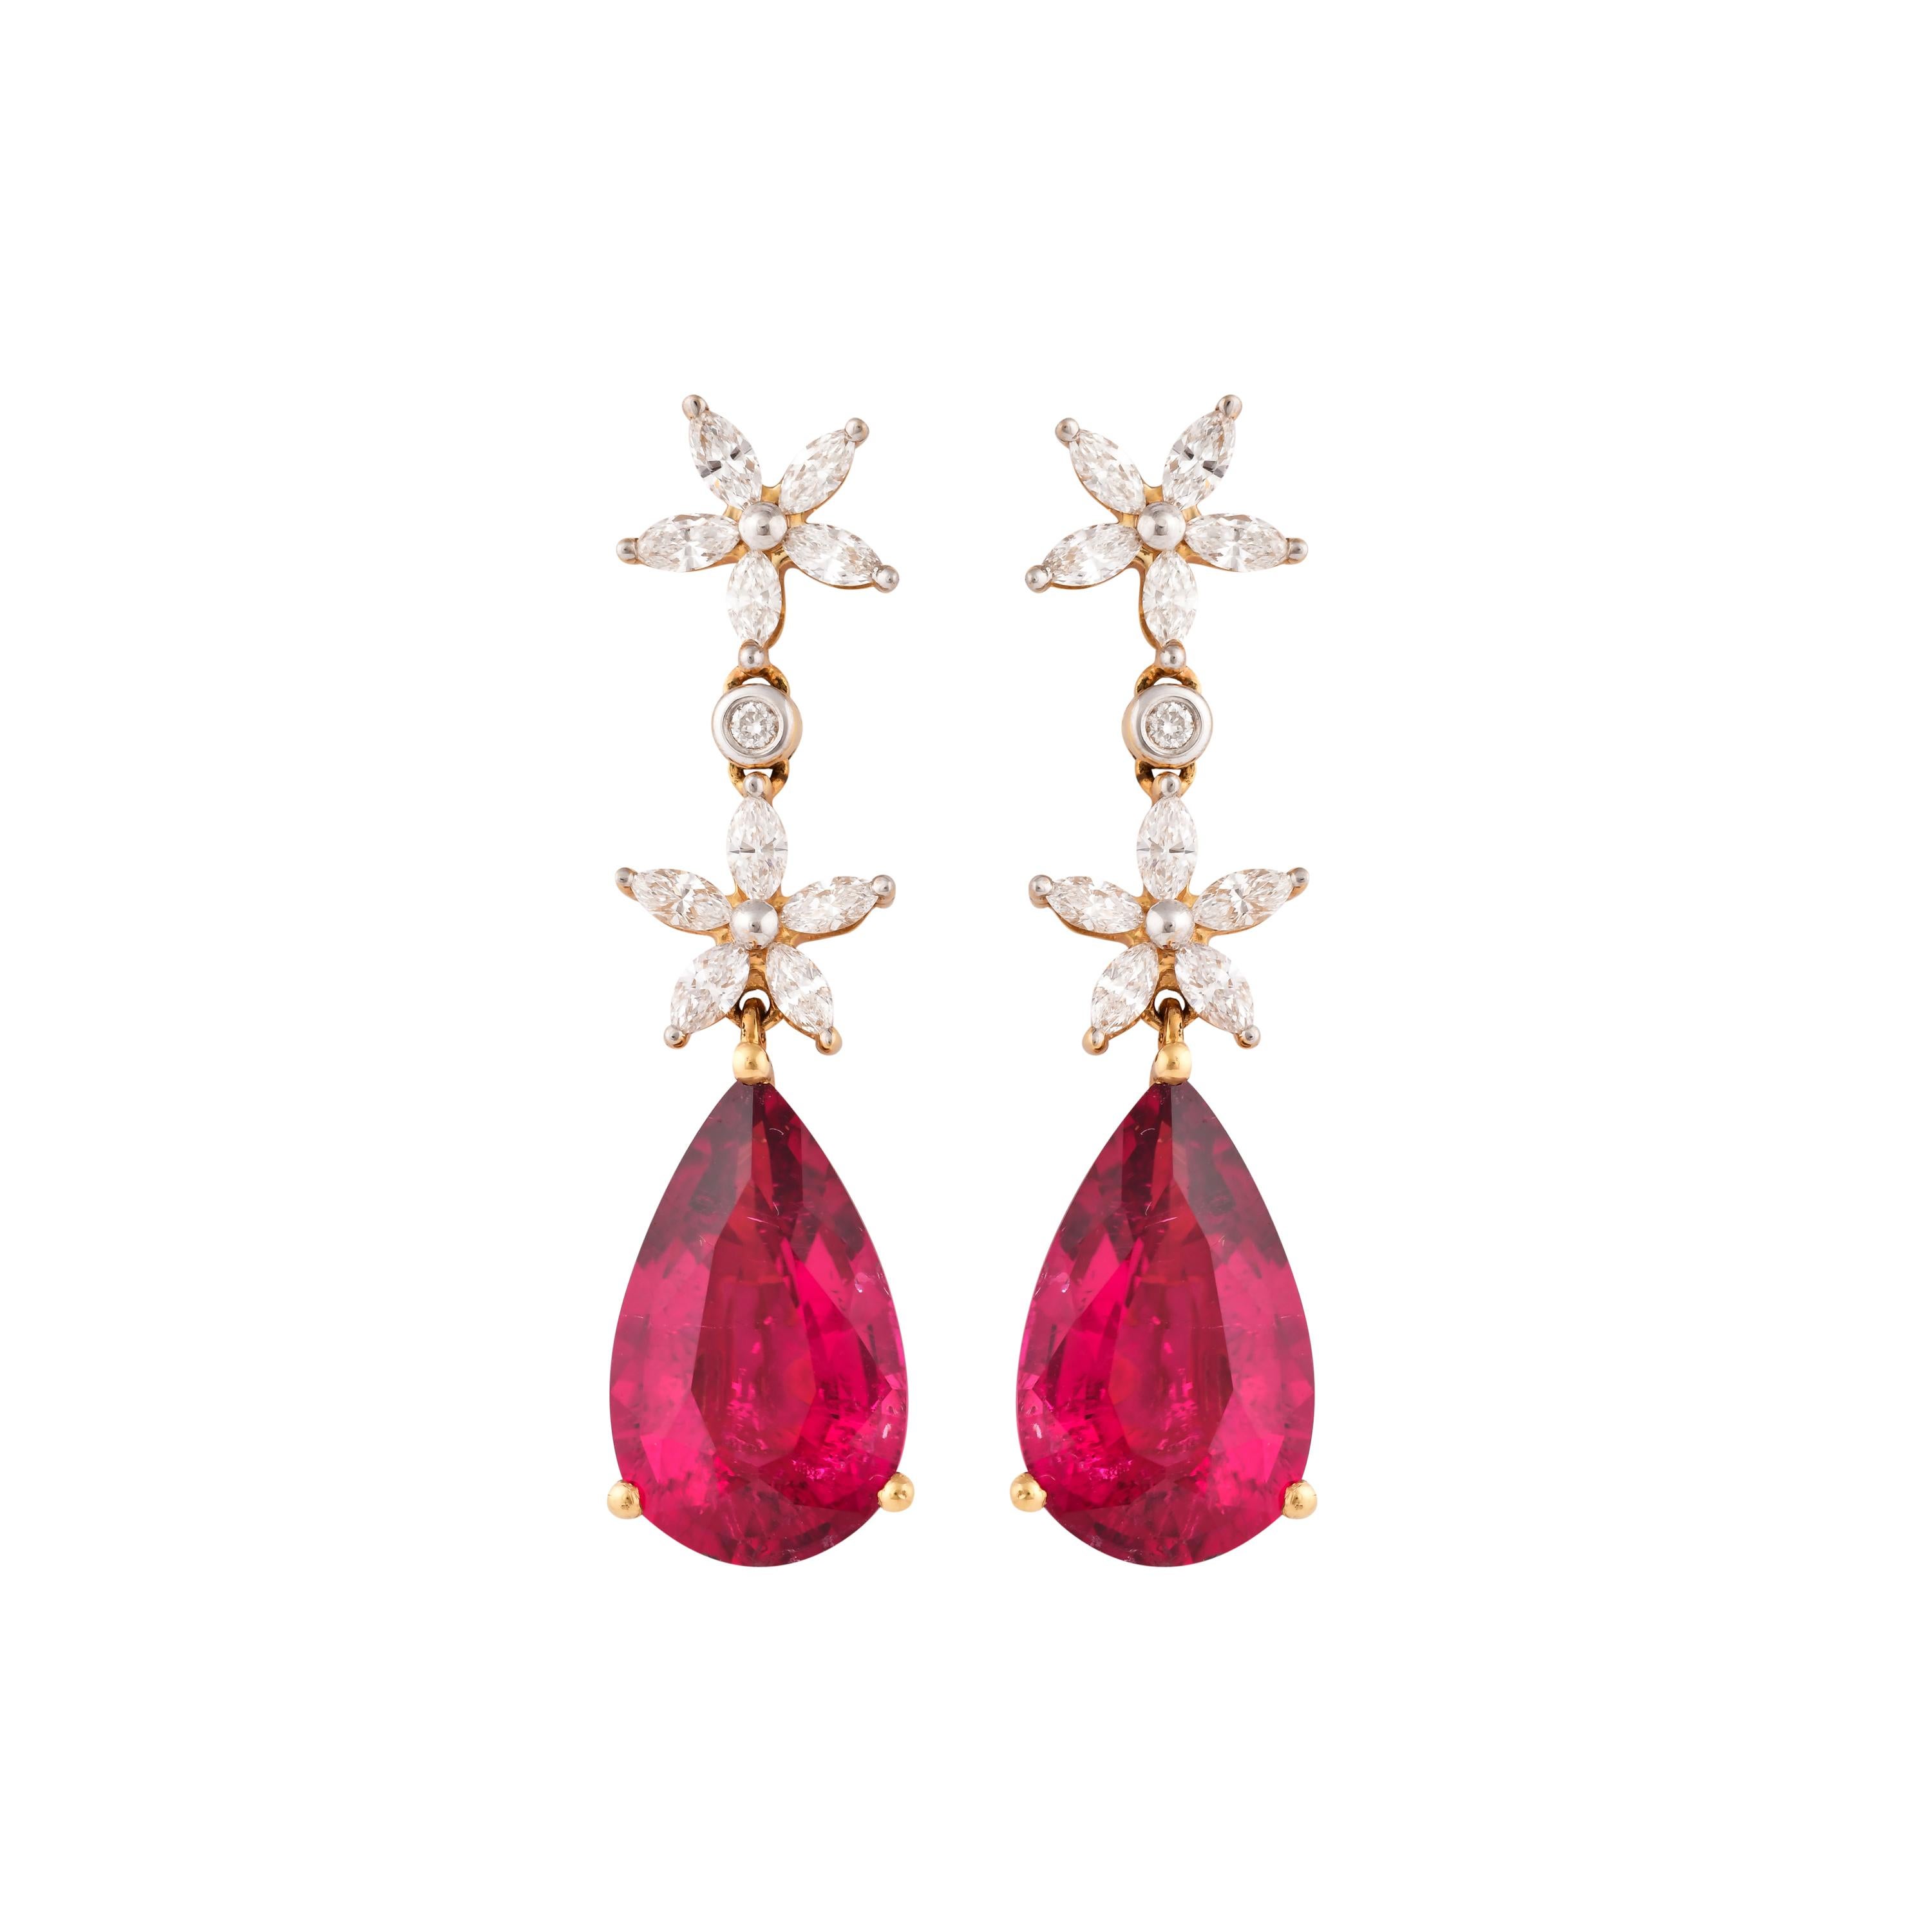 This collection features the most radiant Rubellite tourmalines. These gemstones show a magnificent and regal deep red colour, and the yellow gold and diamond accents makes these pieces a true showstopper. 

Classic Rubellite tourmaline earring in